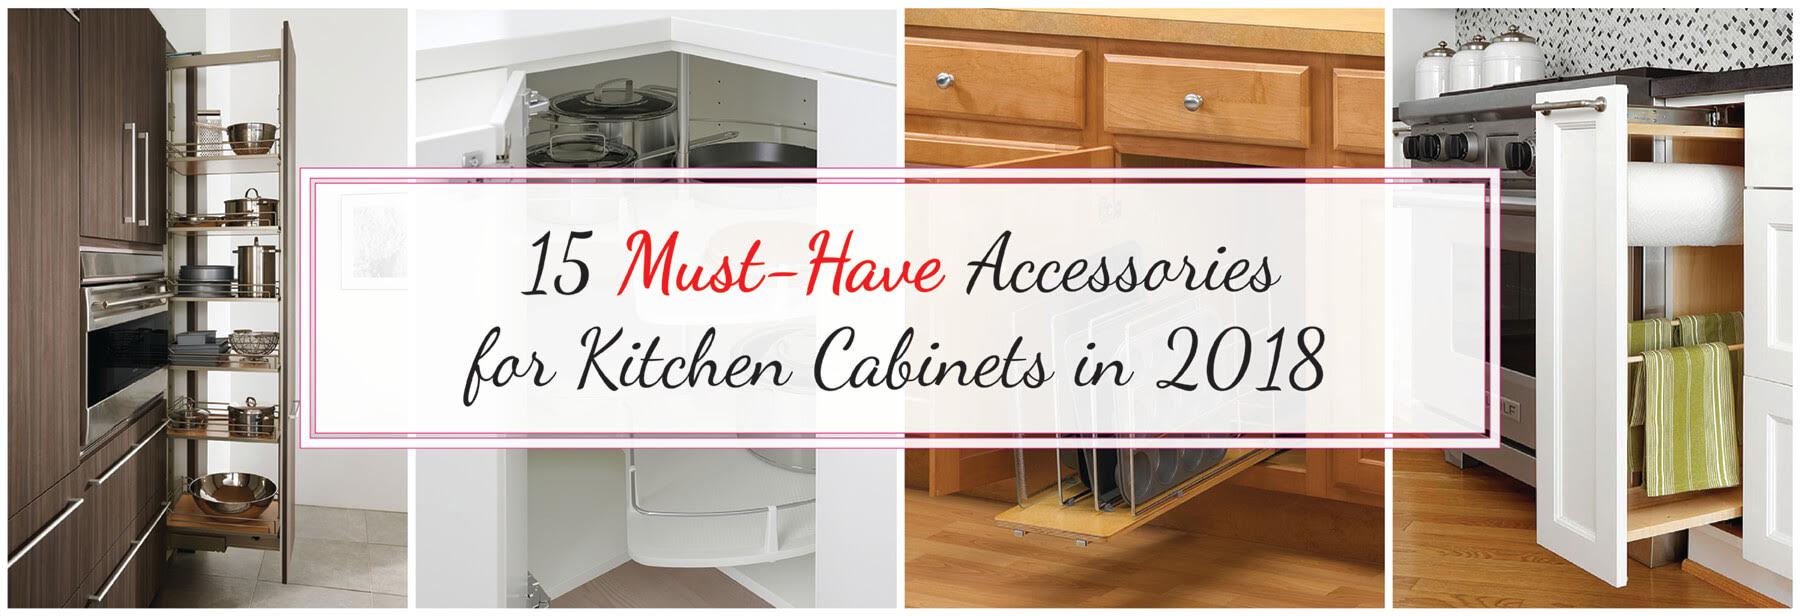 15 Must-Have Accessories for Kitchen Cabinets in 2020